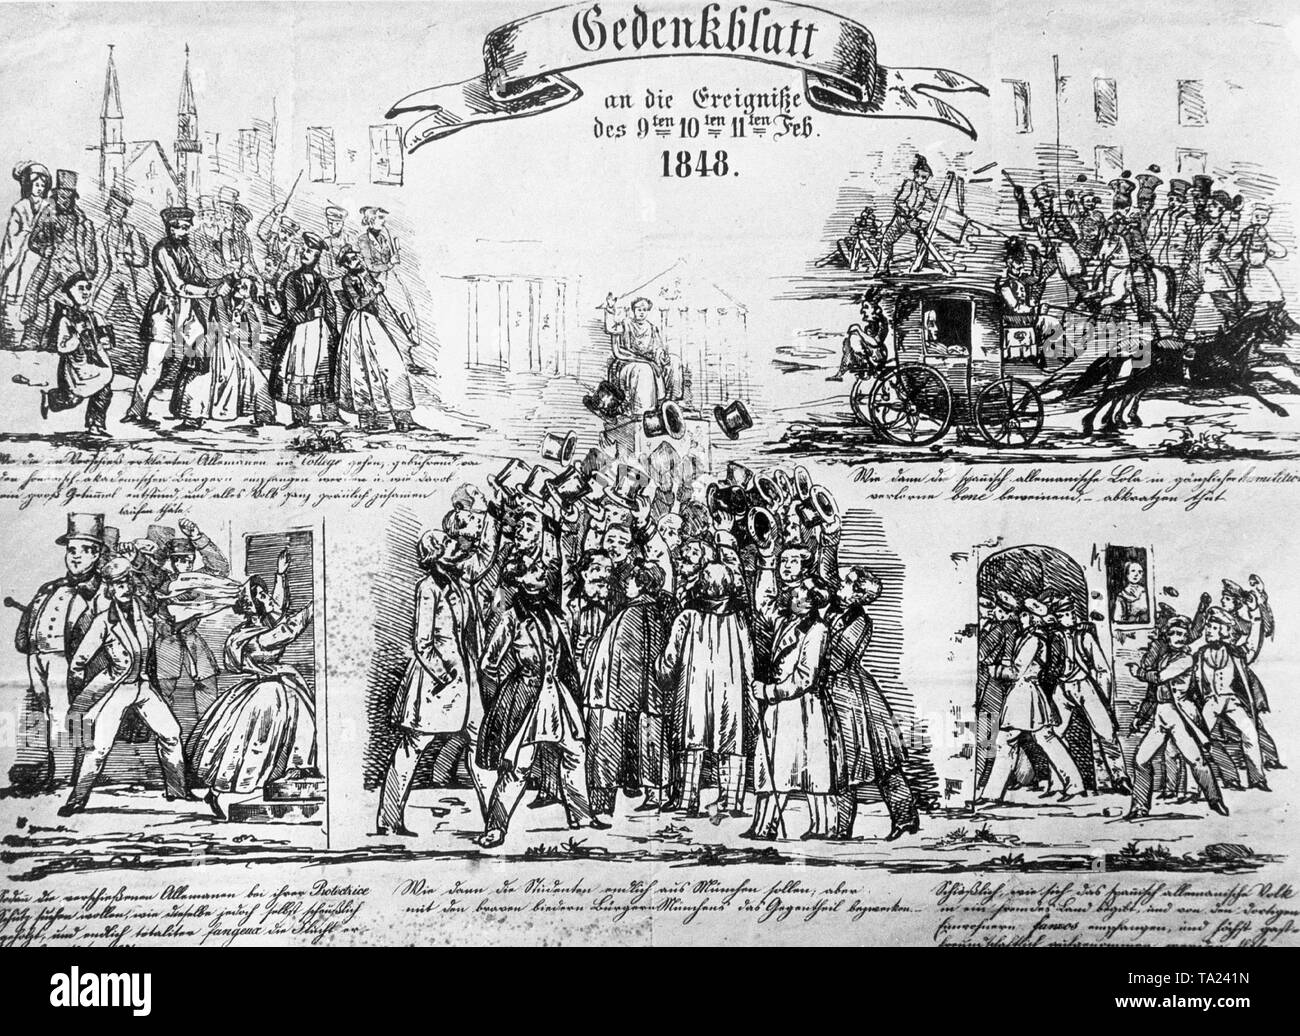 Commemorative paper of the events between 9 and 11 February 1848, the revolution in Bavaria (Lola Montez). Stock Photo